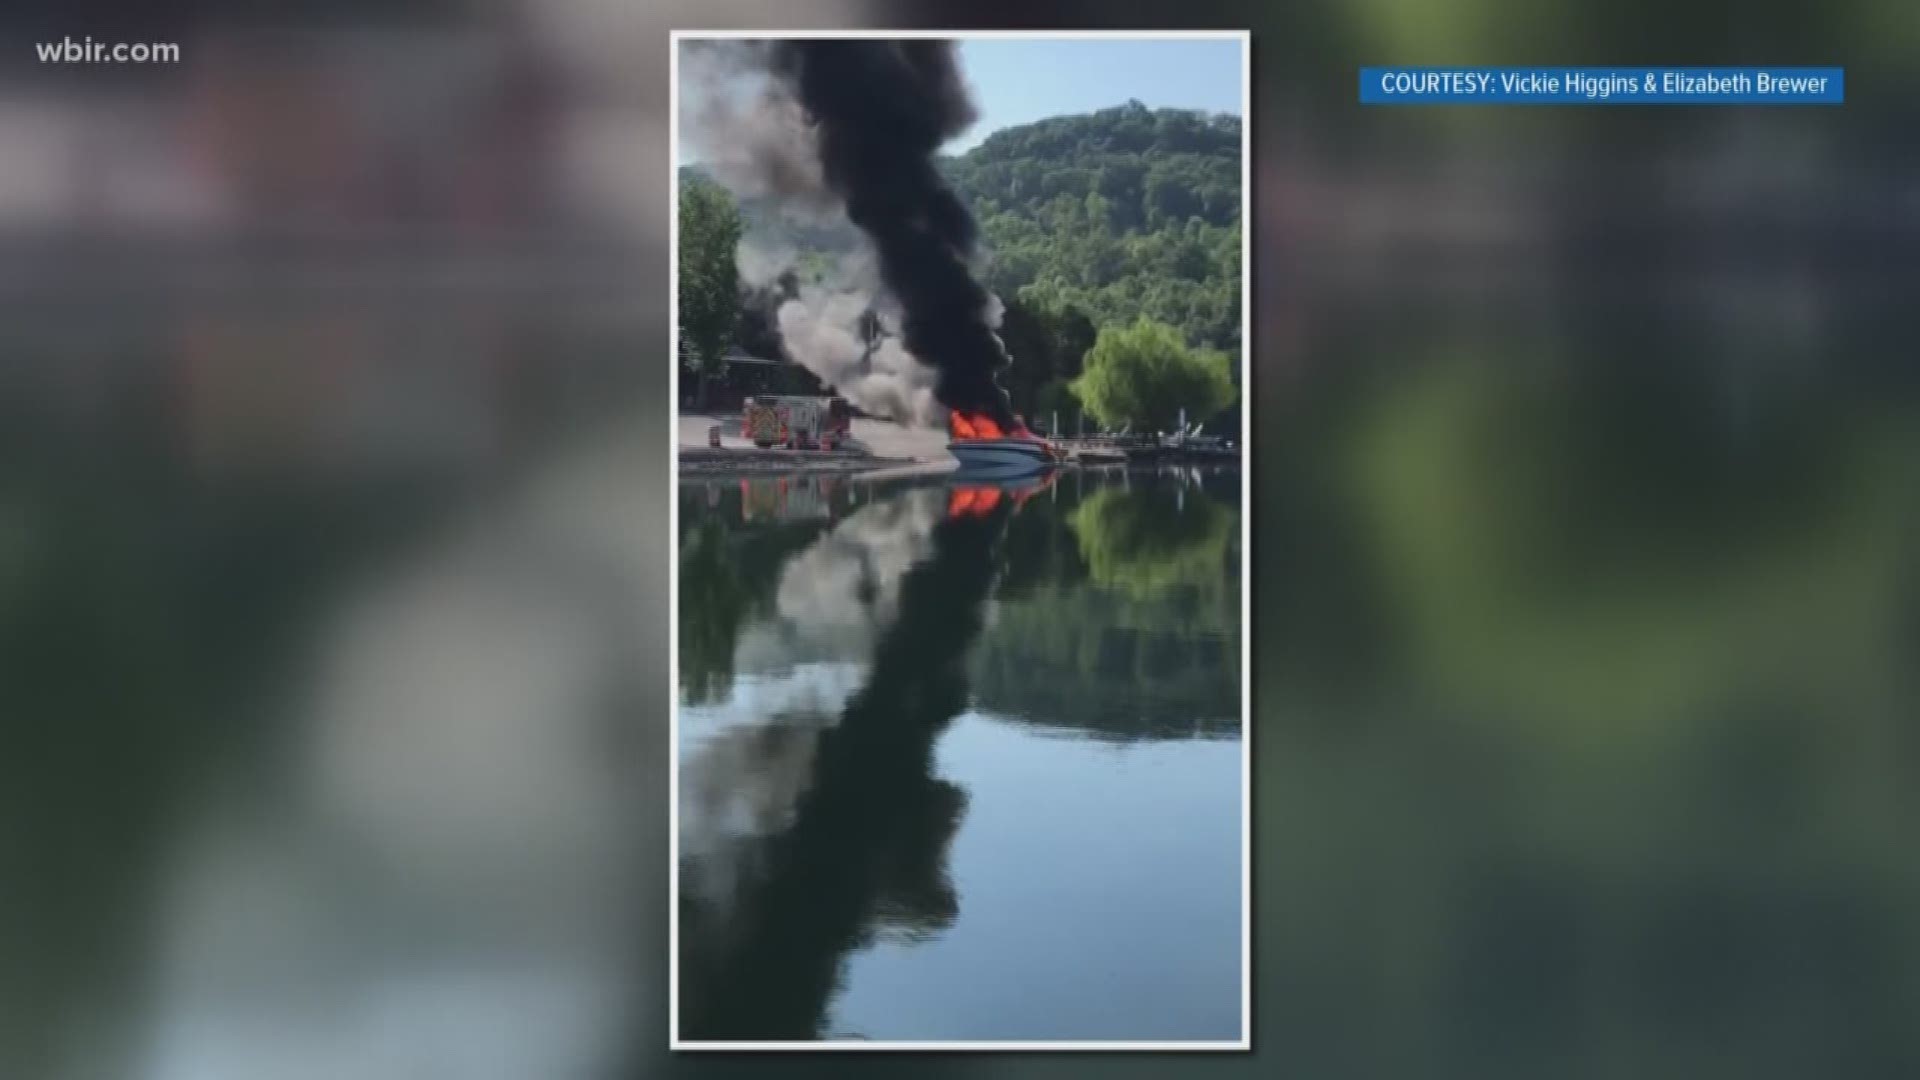 New at noon - one person is being treated for burns after a boat caught fire on Norris Lake. It happened around 9:30 this morning near Lakeside Campground in New Tazewell.